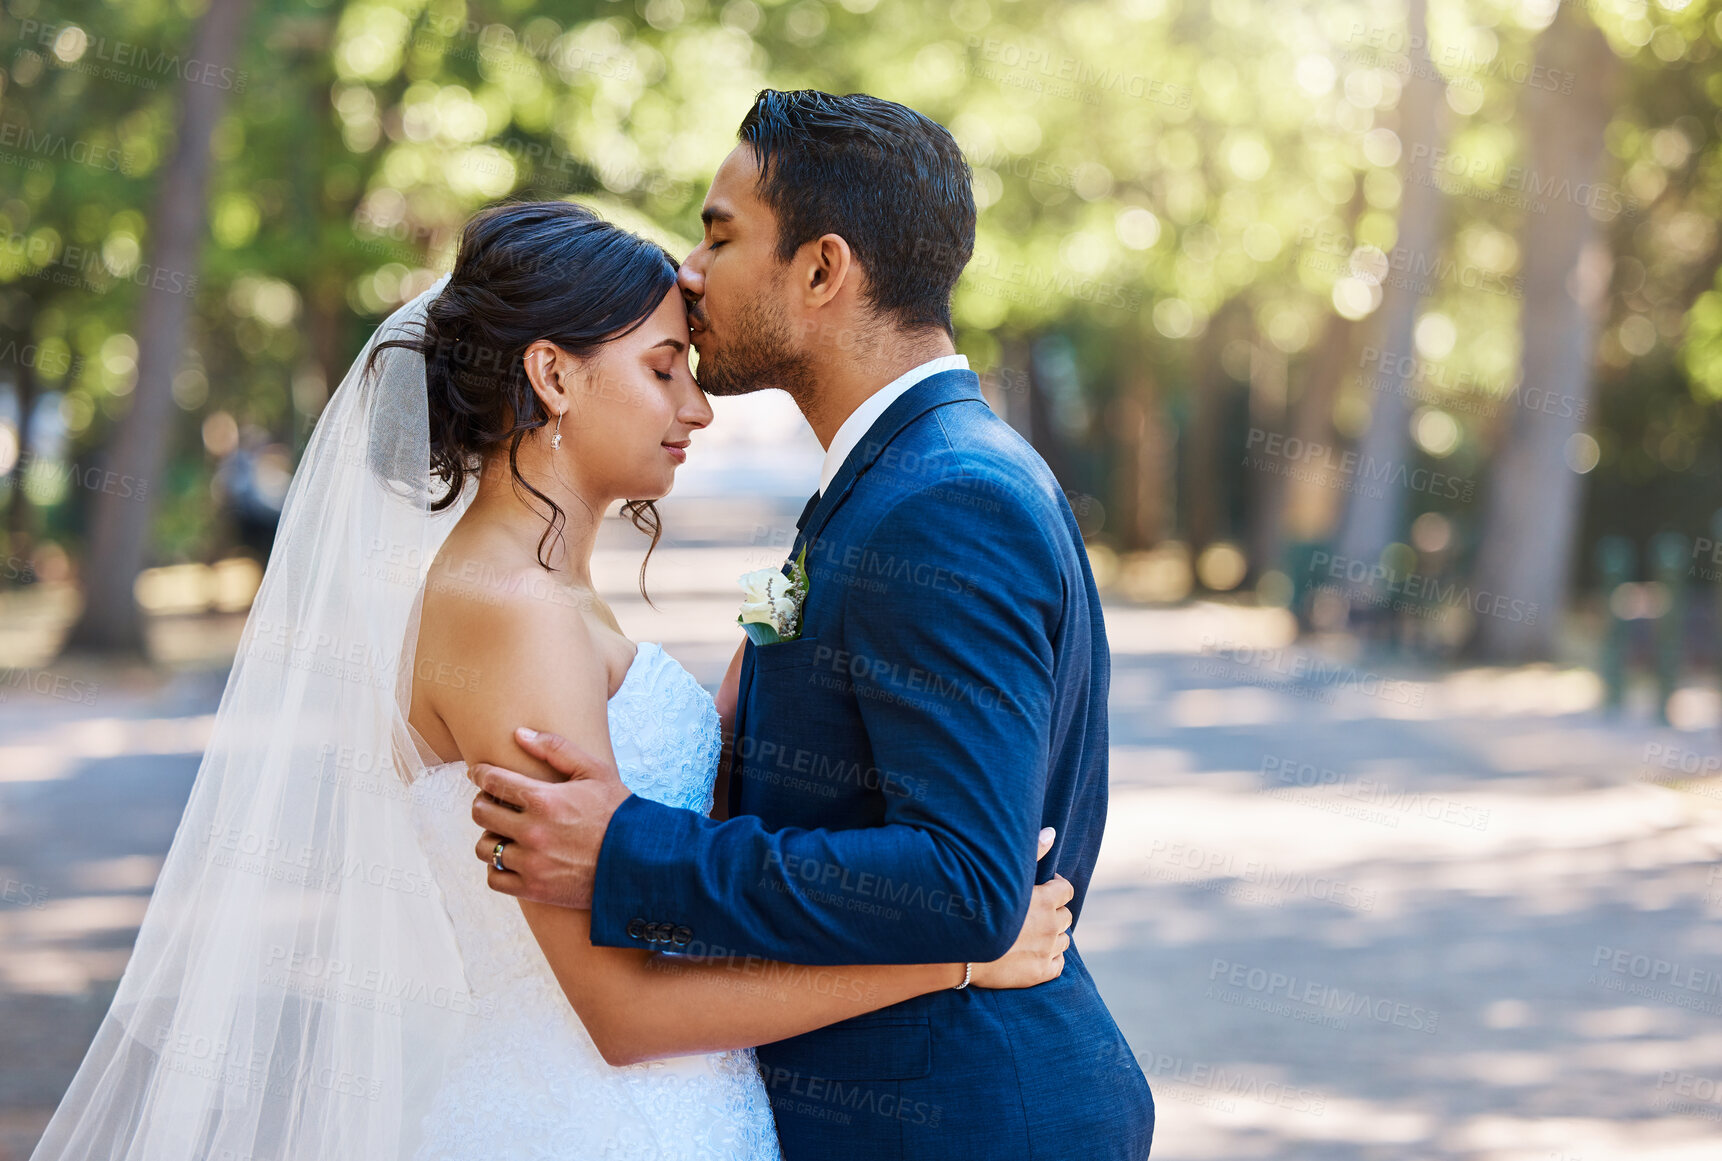 Buy stock photo Loving husband kissing his beautiful bride on the forehead. Happy in love newlywed couple standing together sharing romantic moment outdoors